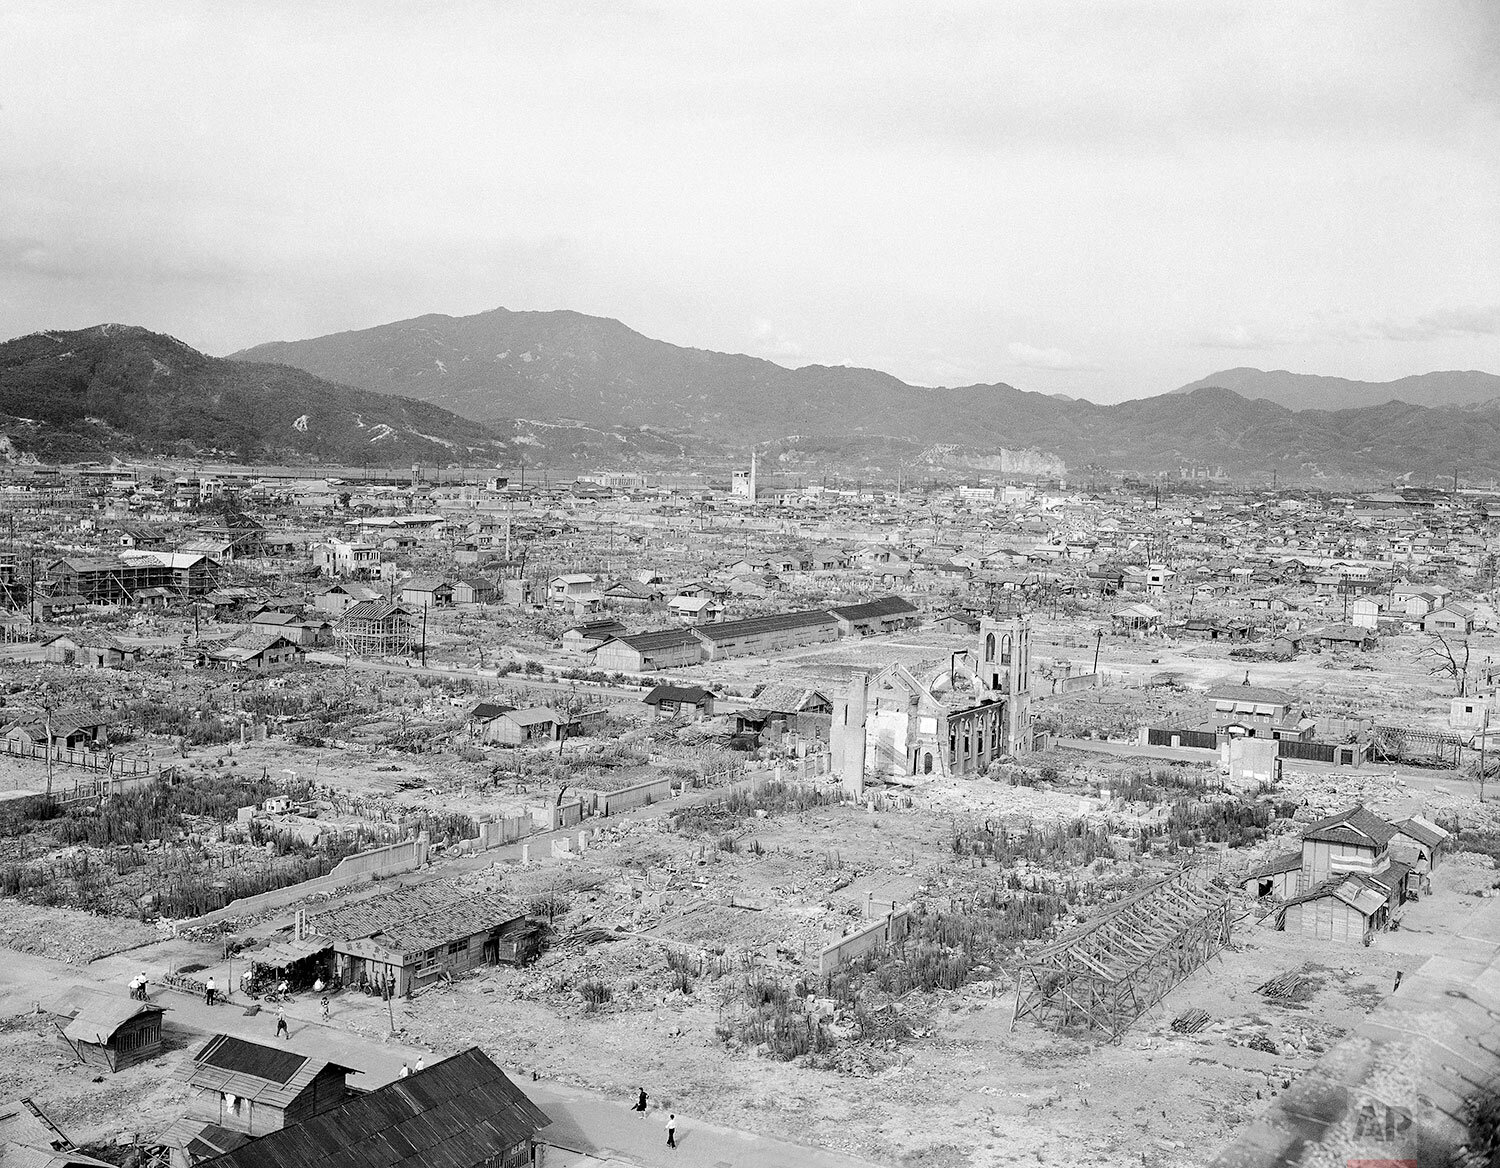  Aerial view of the city one year after the atomic bomb blast, shows some small amount of reconstruction amid much ruin in Hiroshima, Japan on July 20, 1946. (AP Photo/Charles P. Gorry) 